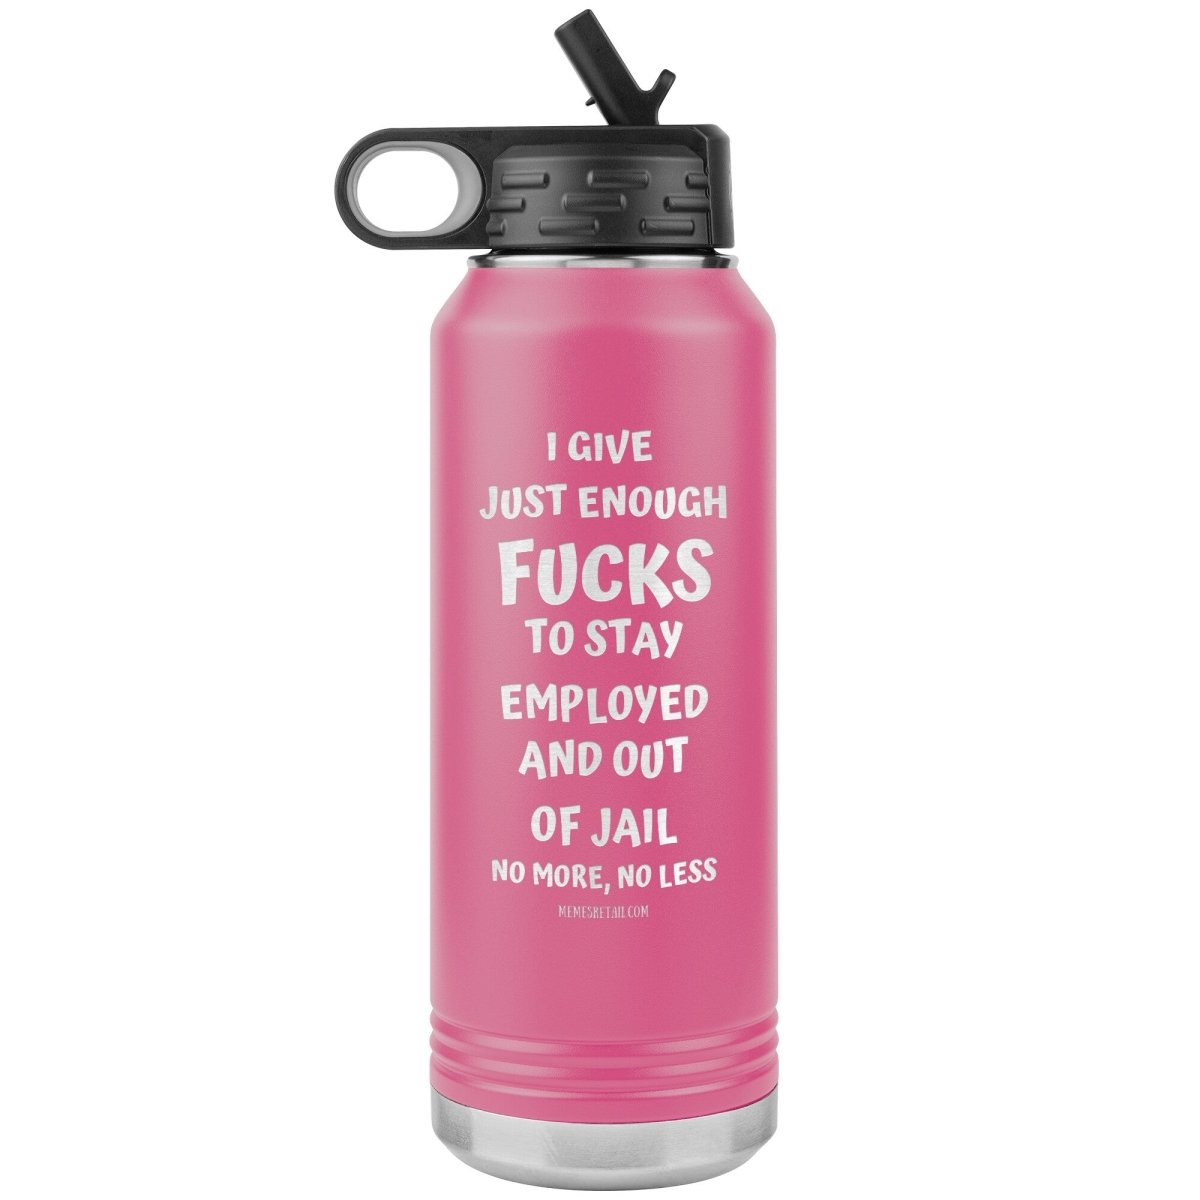 I Give Just Enough Fucks To Stay Employed And Out Of Jail, No More, No Less 32 Oz Water Bottle Tumbler, Pink - MemesRetail.com